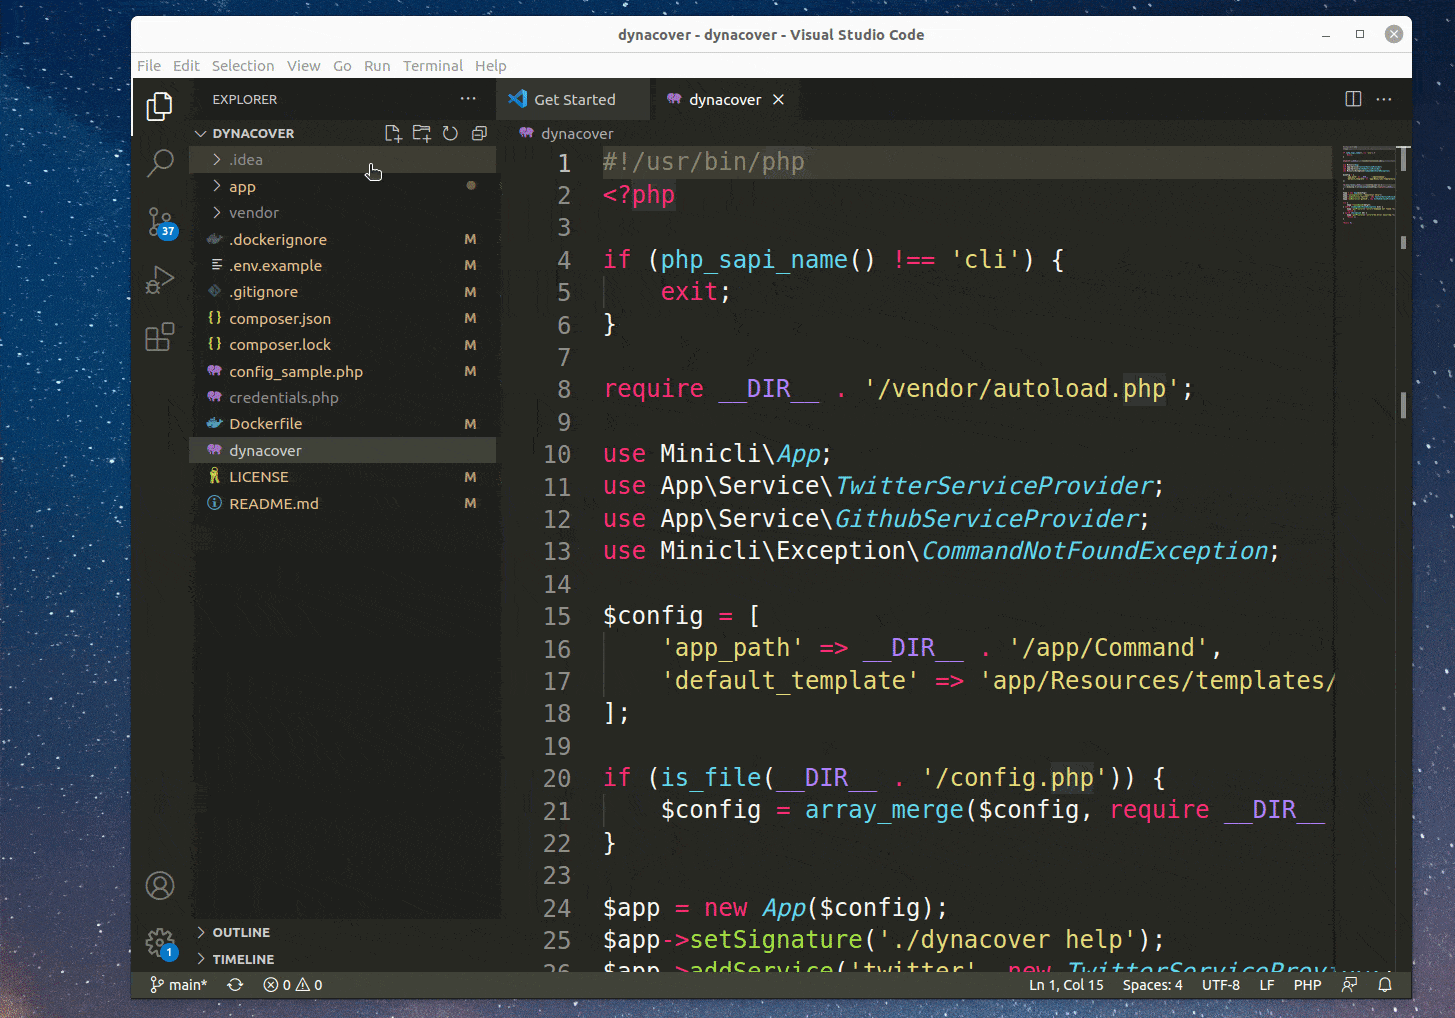 Installing a VS Code extension through the IDE